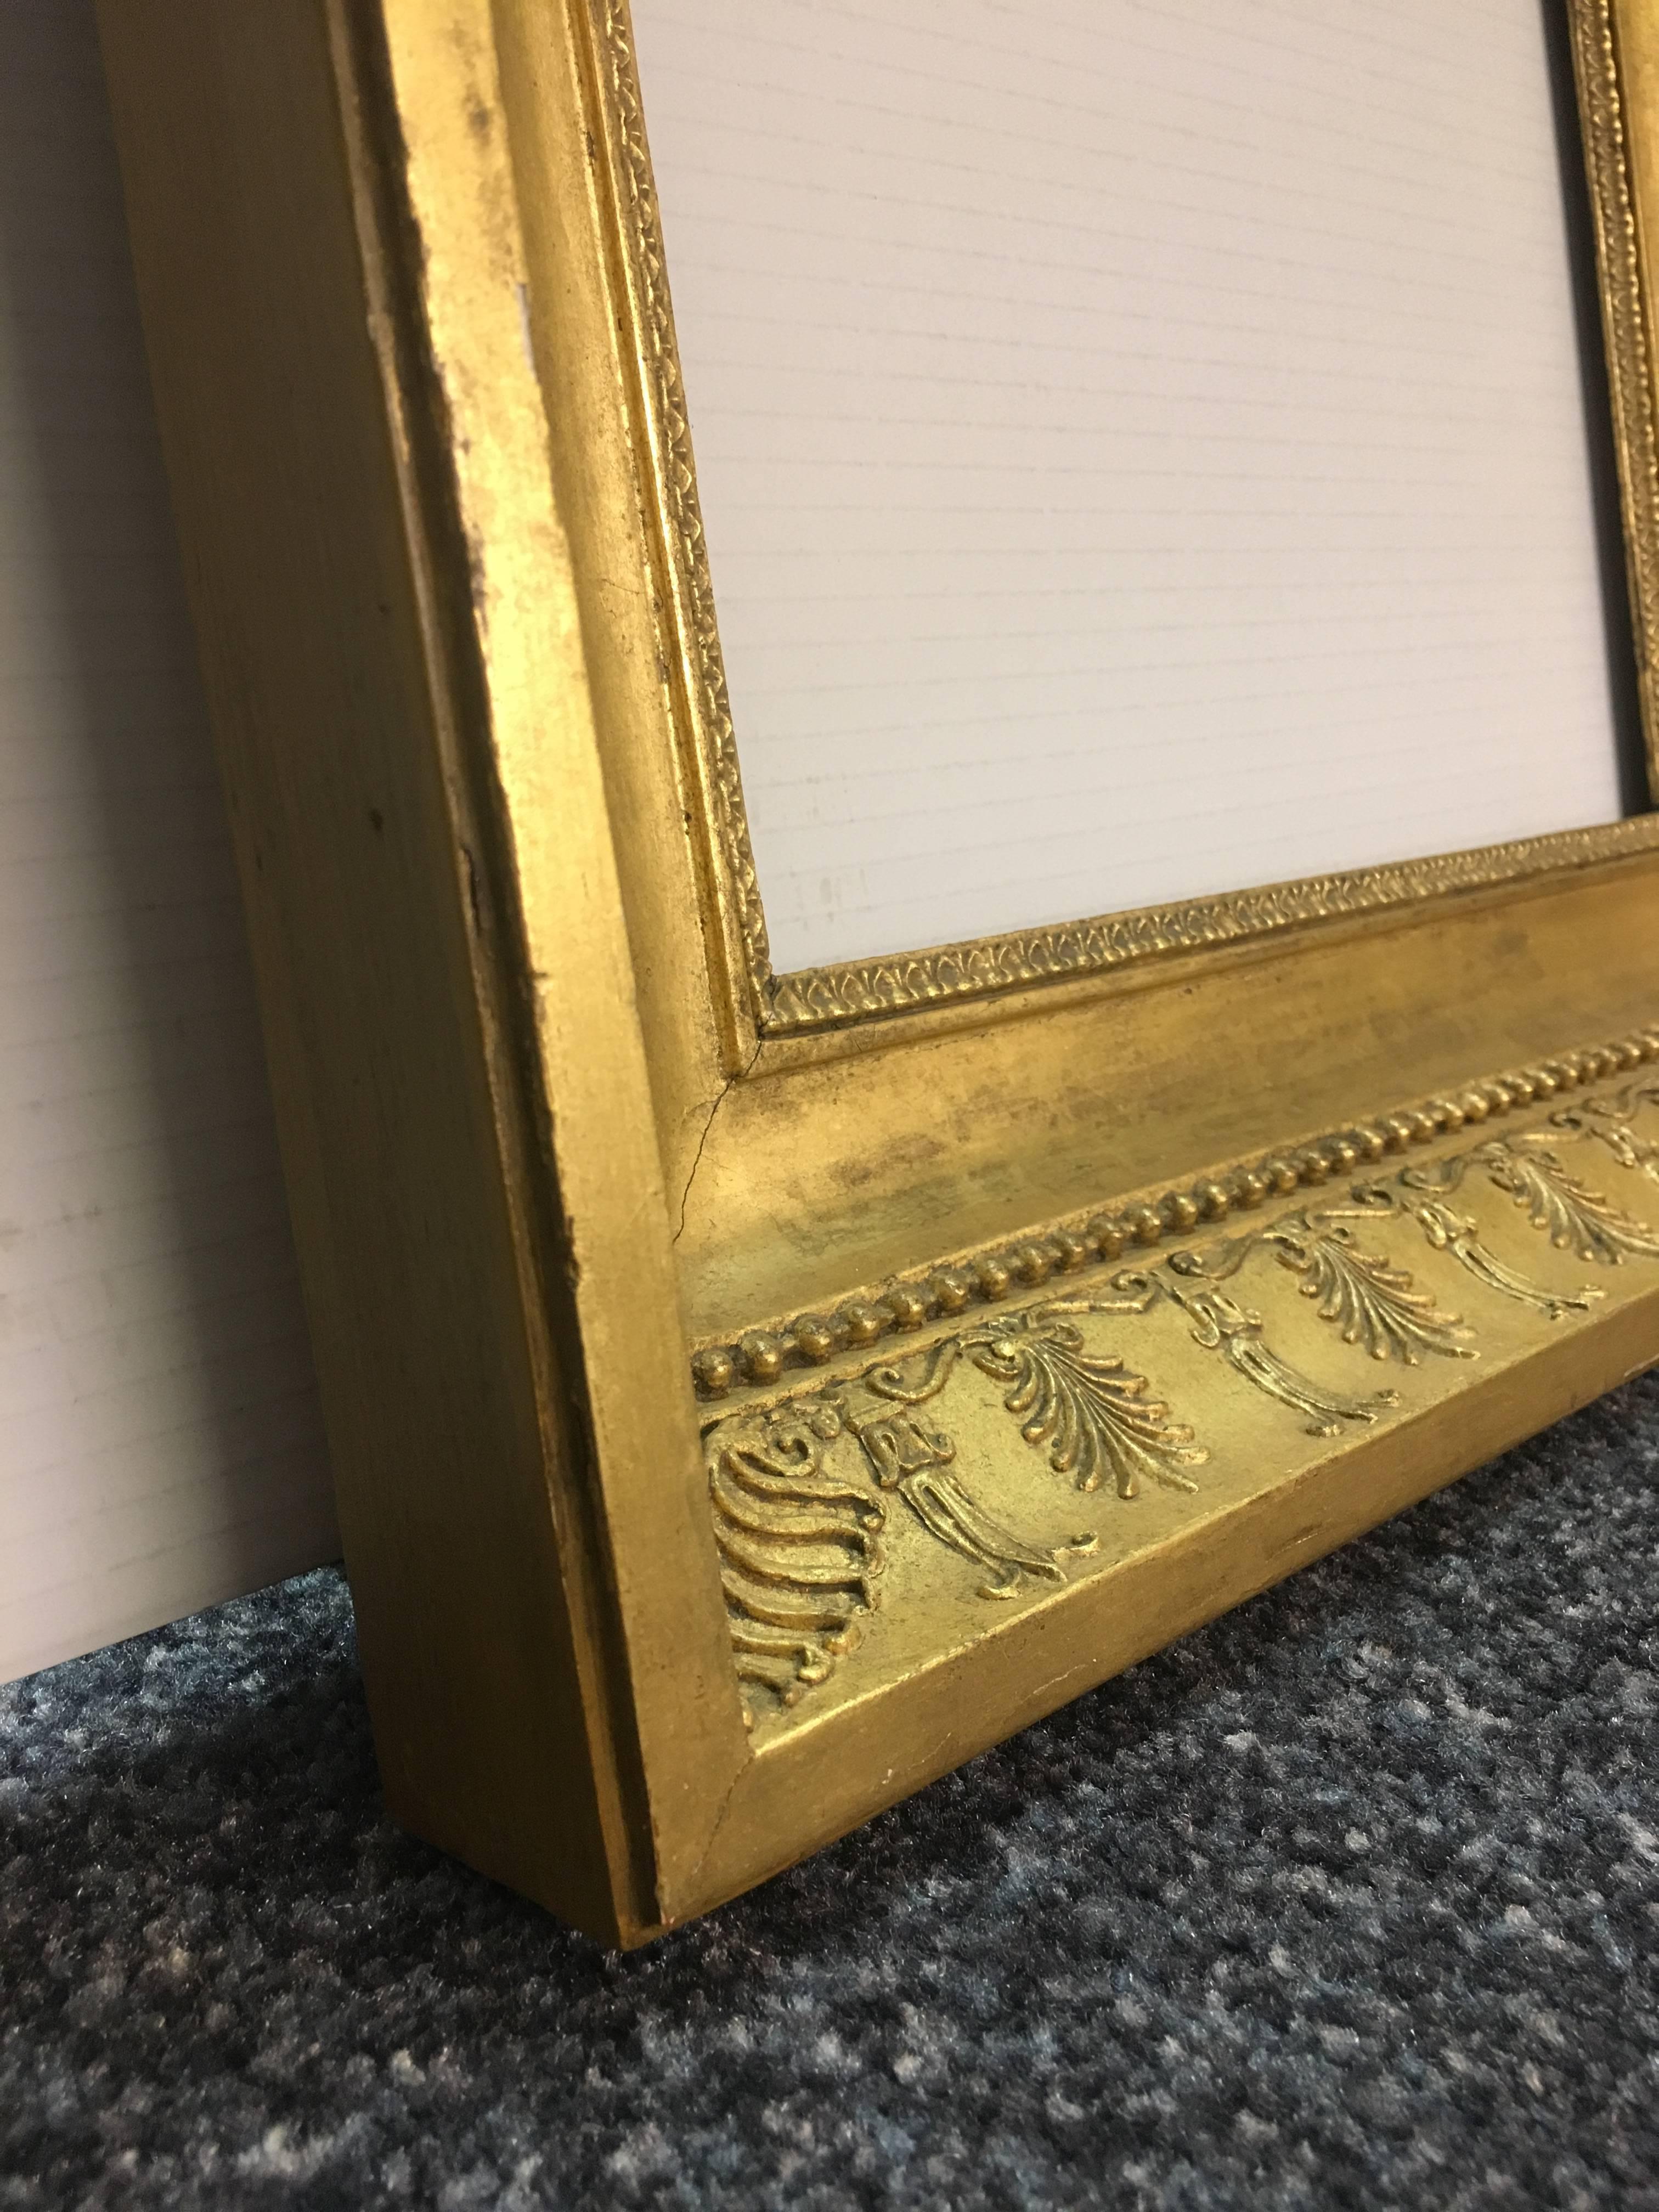 Late 19th Century Italian Neoclassical Wood Frame with Gold Leaf Cover For Sale 4